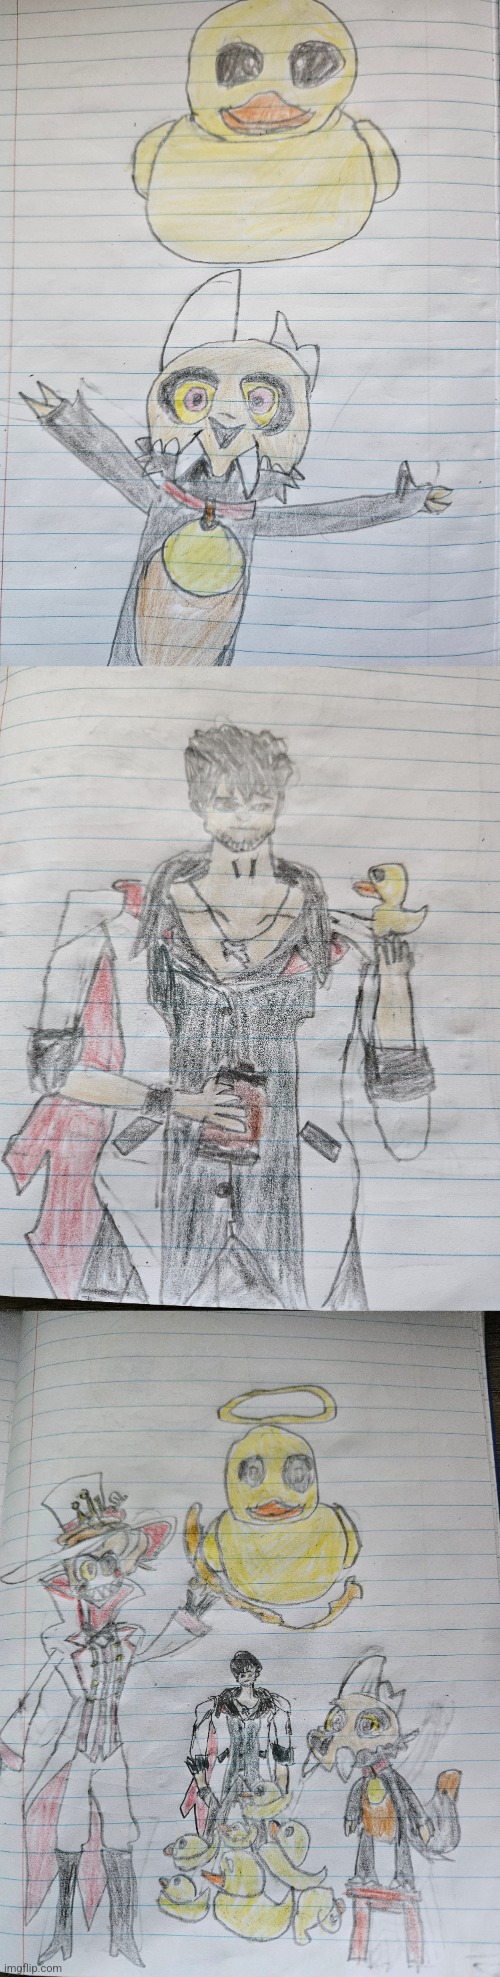 My friends requested three rubber ducky centered drawings. The characters are King (Owl House), Qrow (RWBY), and Lucifer (HH) | image tagged in drawing,hazbin hotel,rwby,the owl house | made w/ Imgflip meme maker